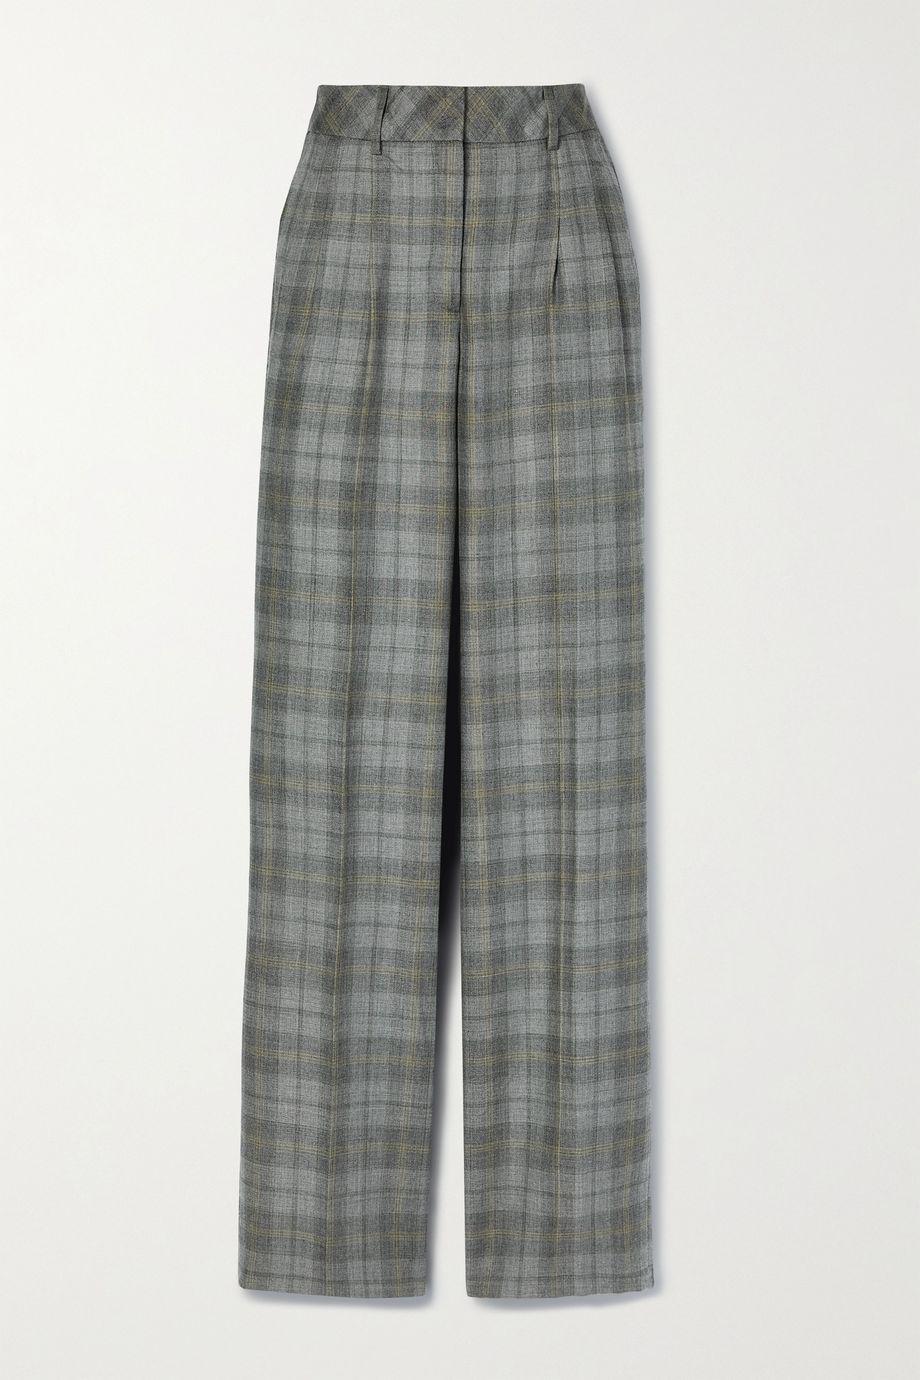 Checked cashmere and mulberry silk-blend straight-leg pants by AKRIS